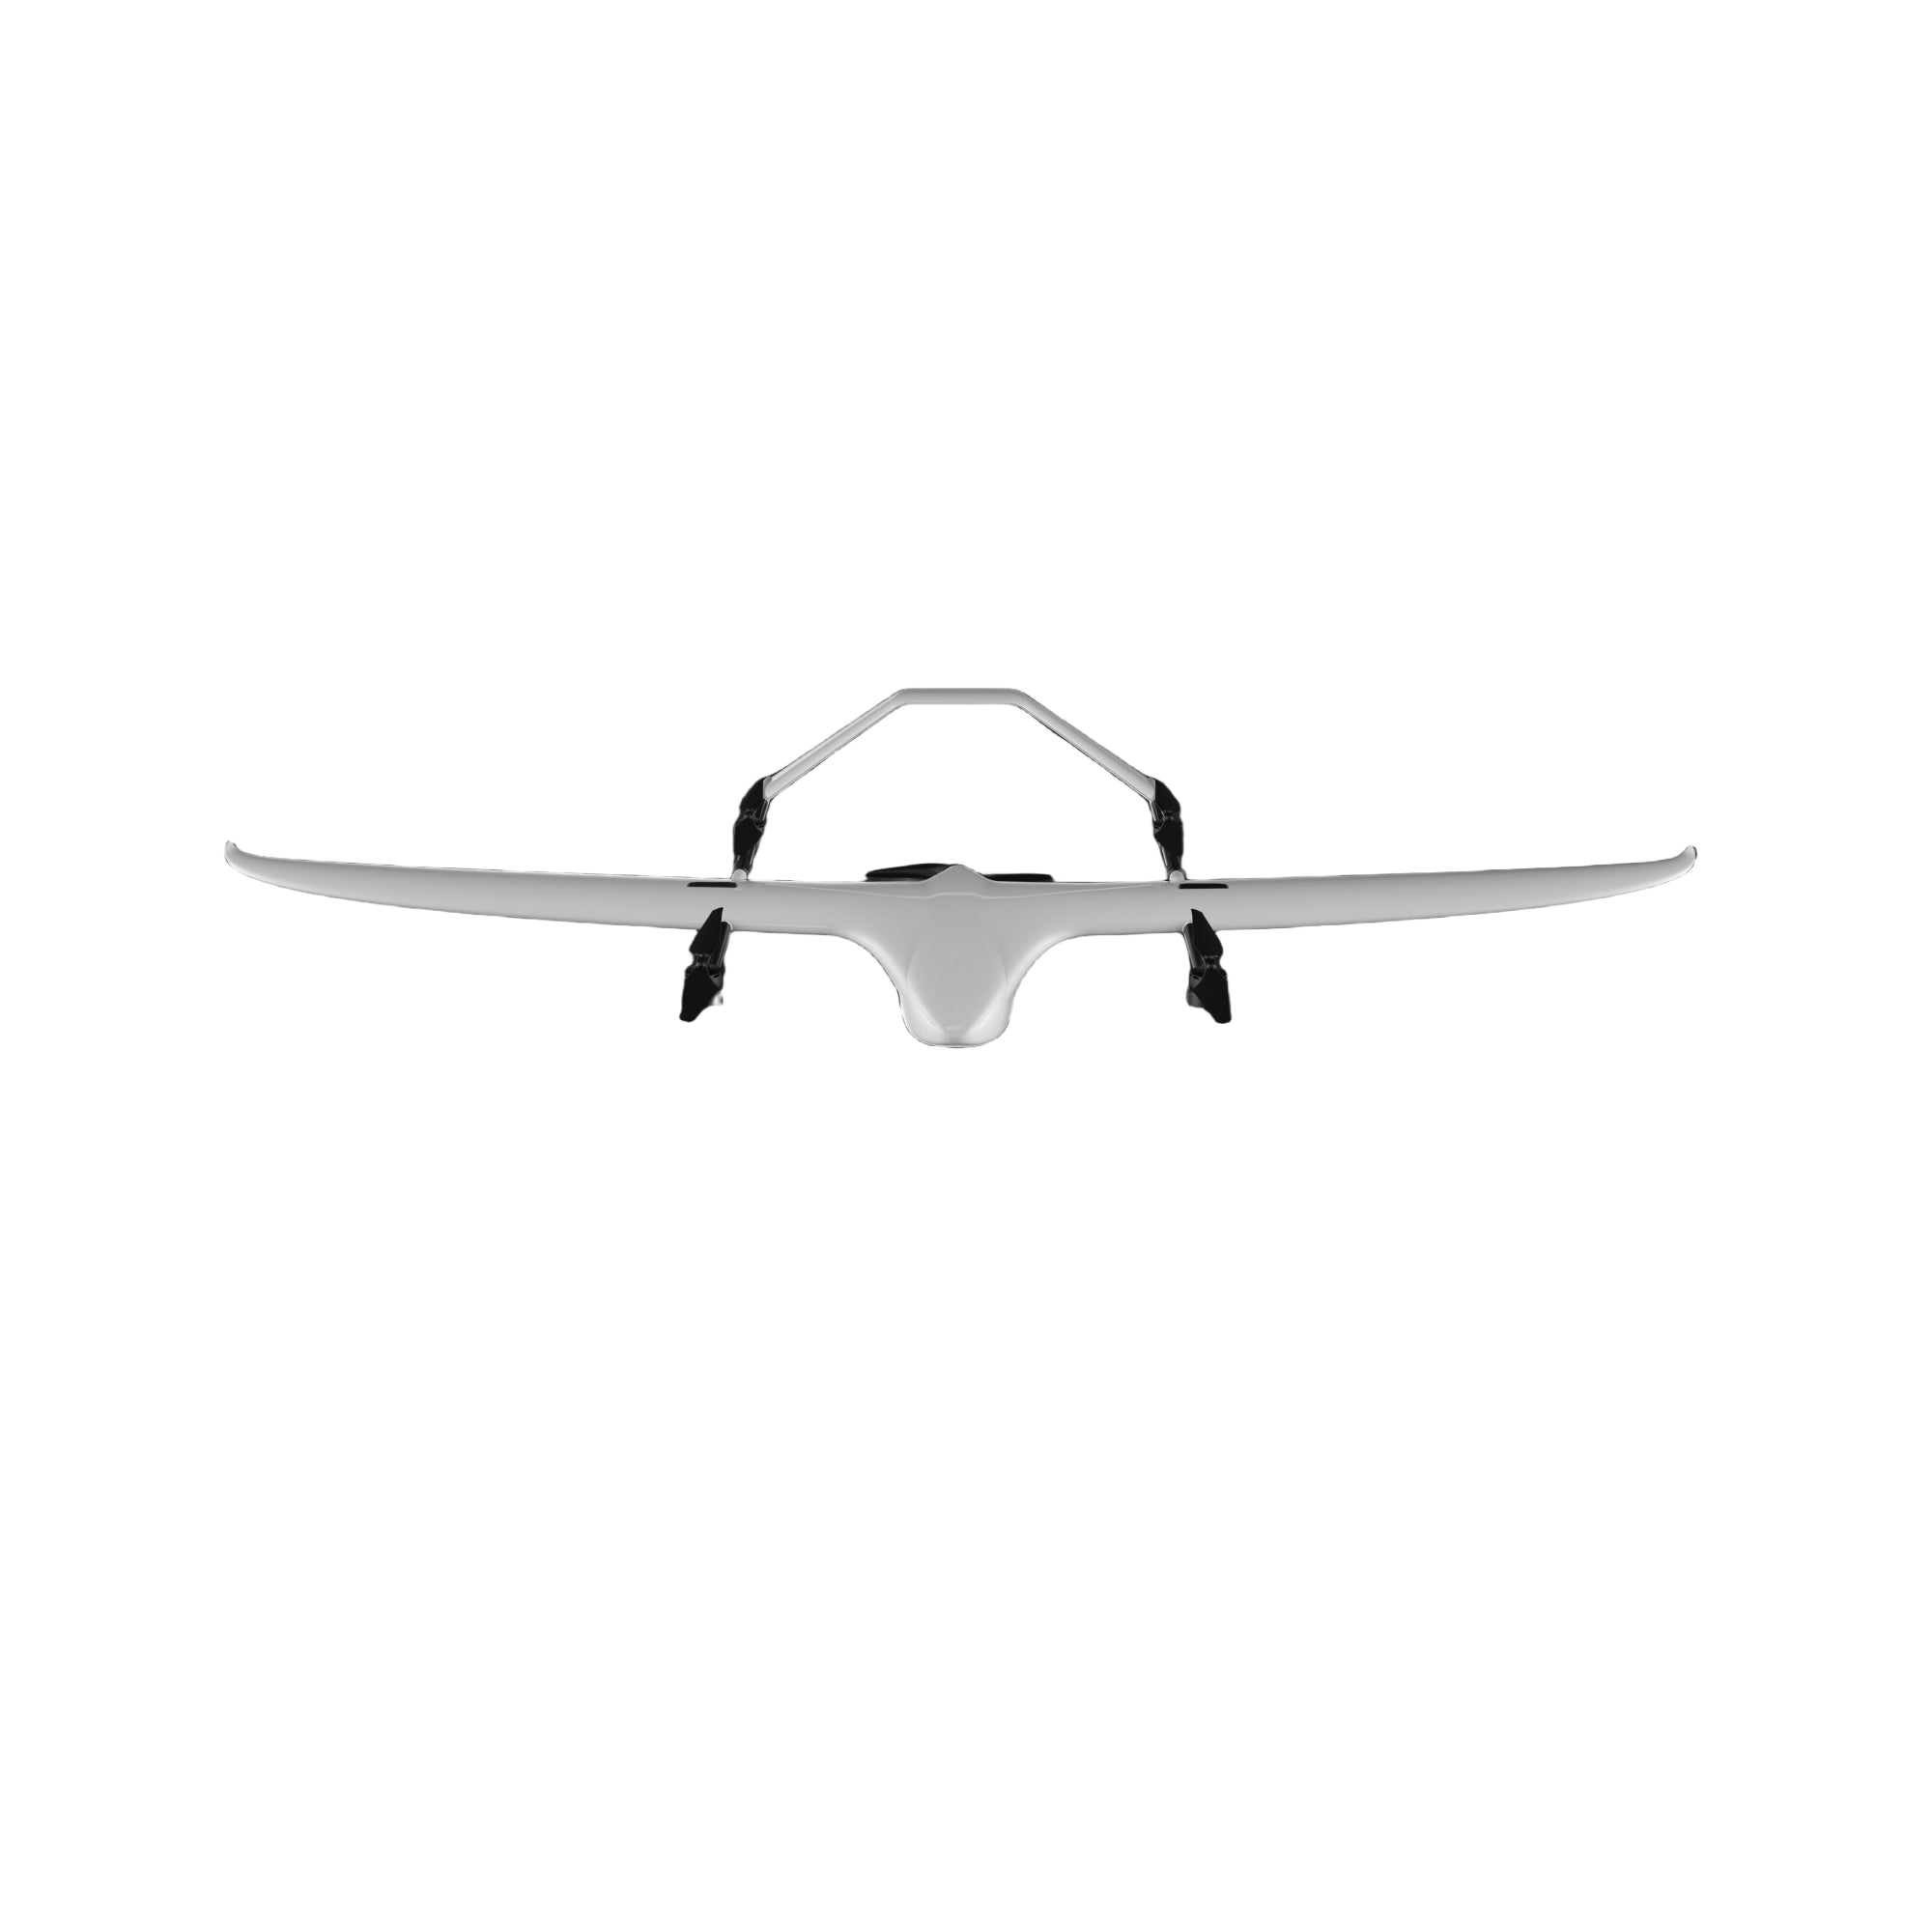 UnmannedRC Swift VTOL Plane For Drone Mapping and Aerial Surveying - Unmanned RC